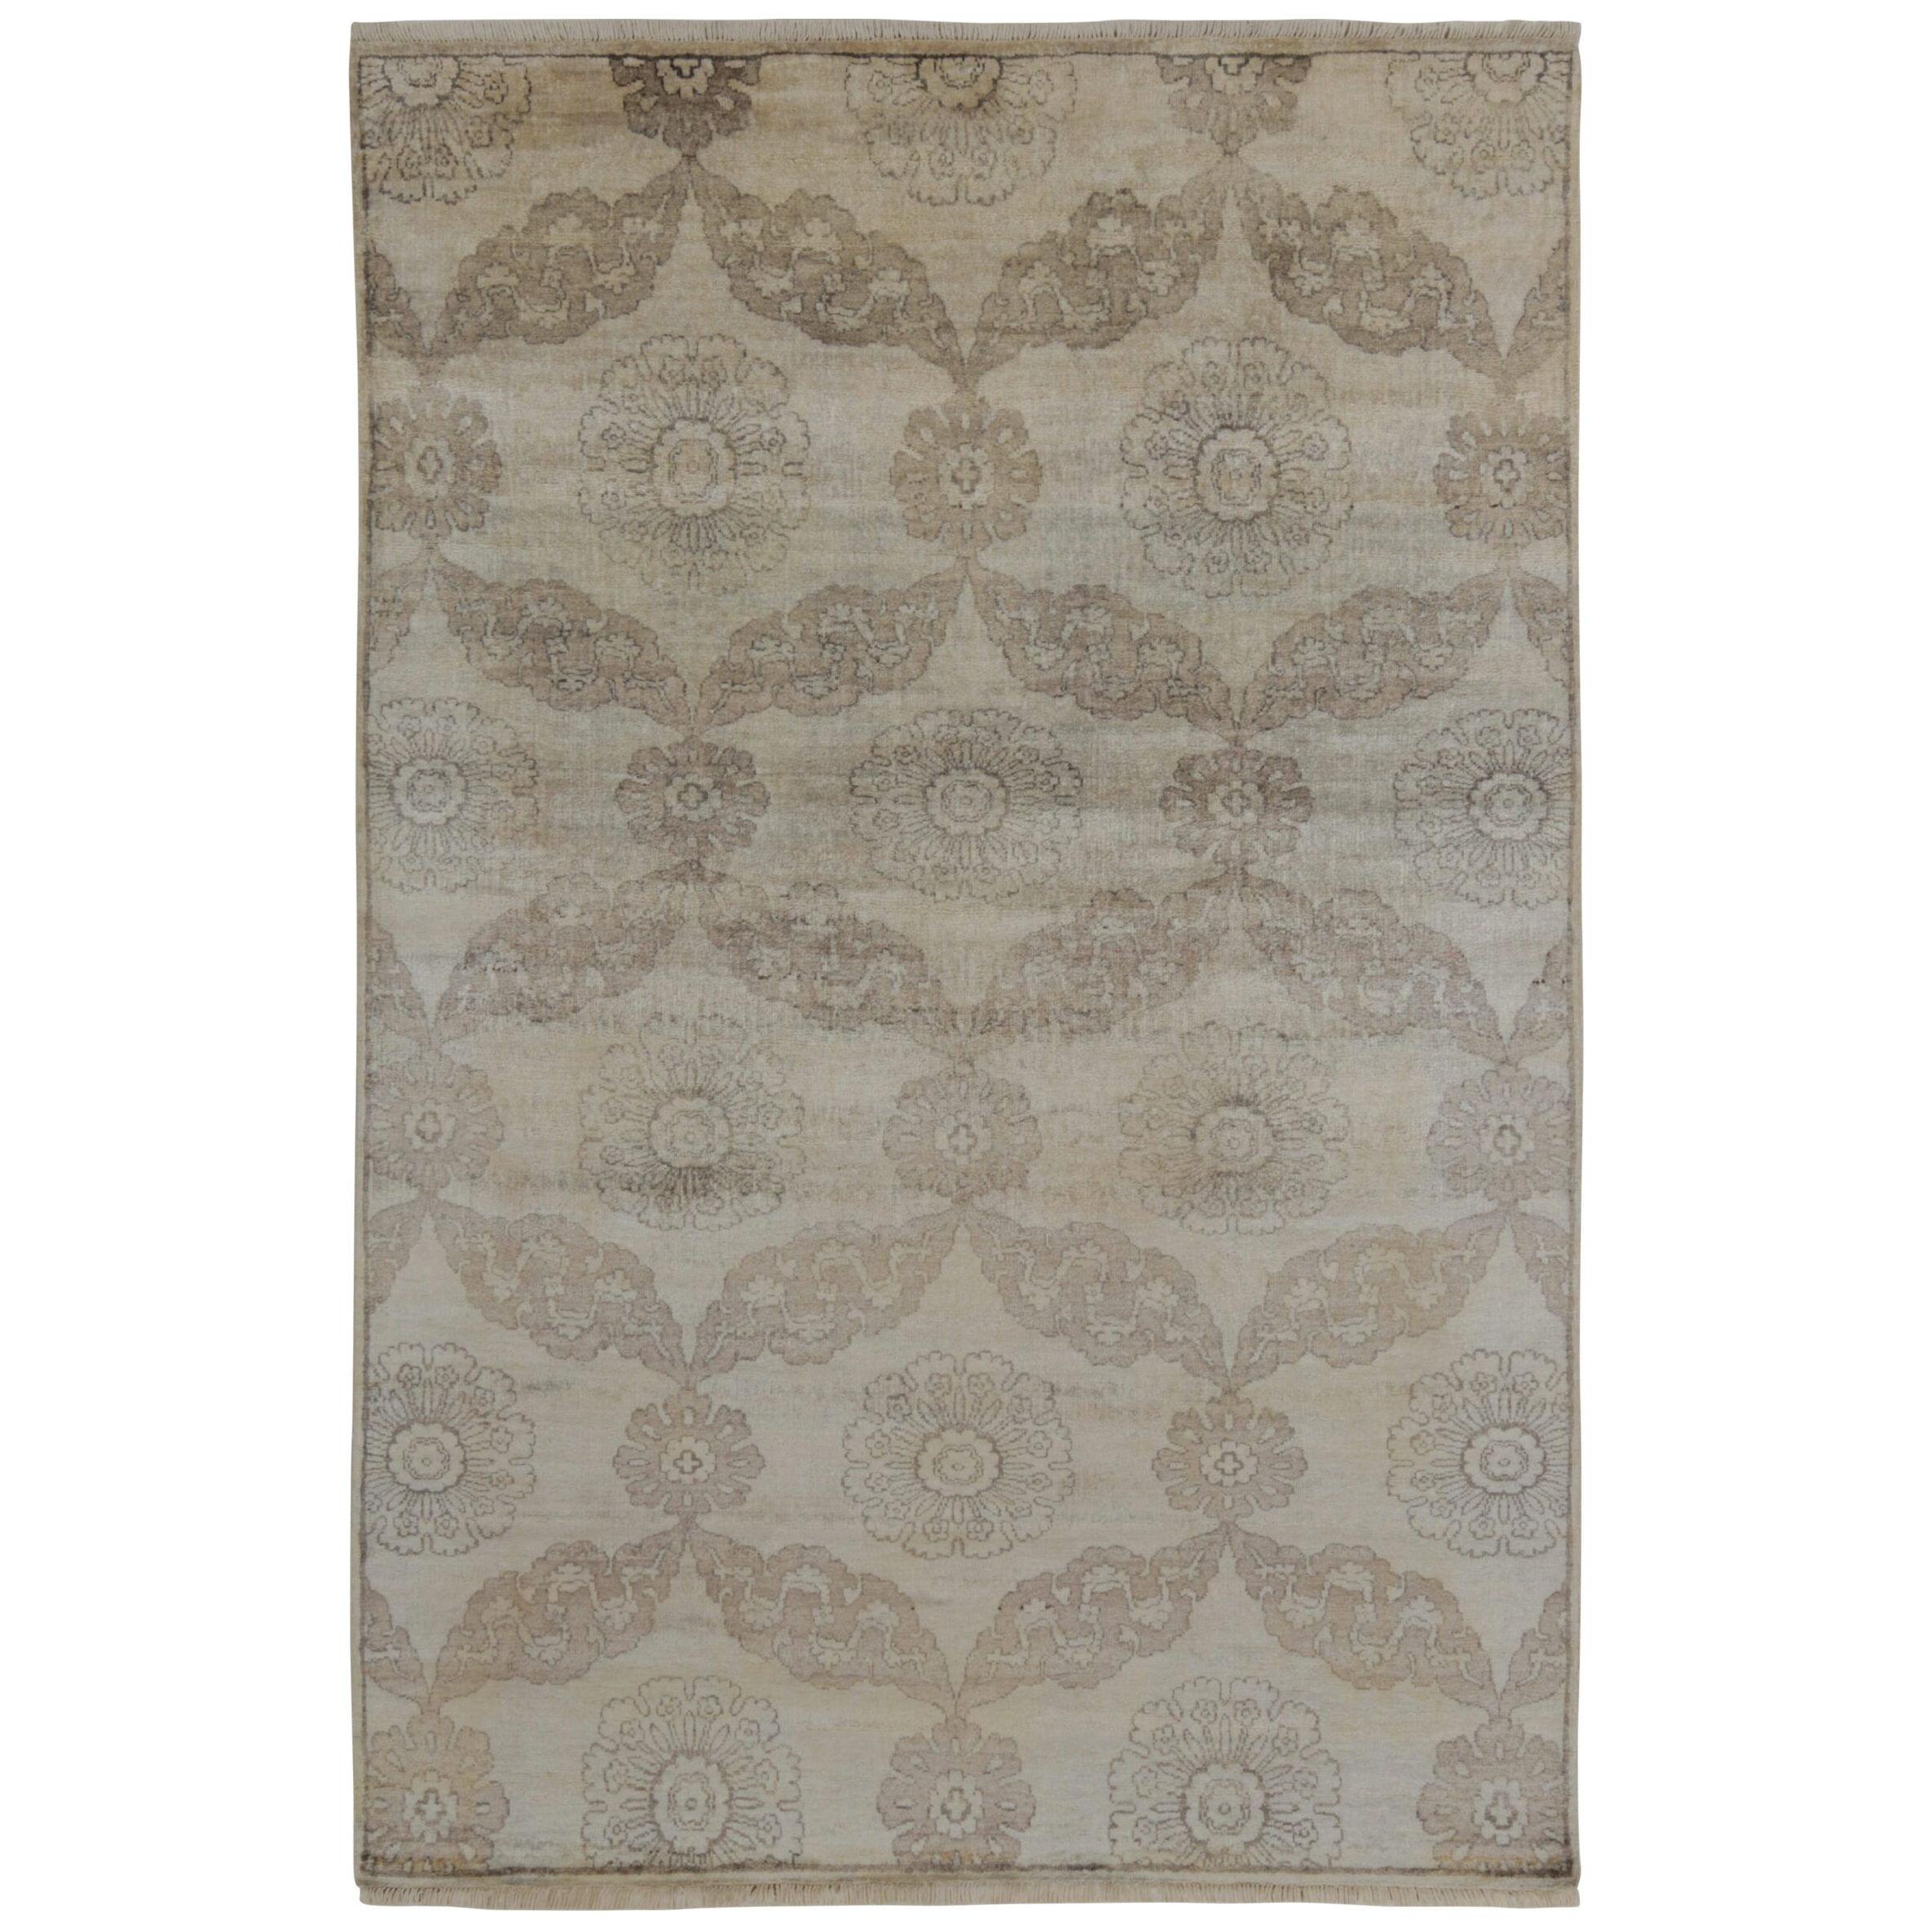 Rug & Kilim’s Classic Style Rug in Beige-Brown and Silver-Gray Floral Patterns